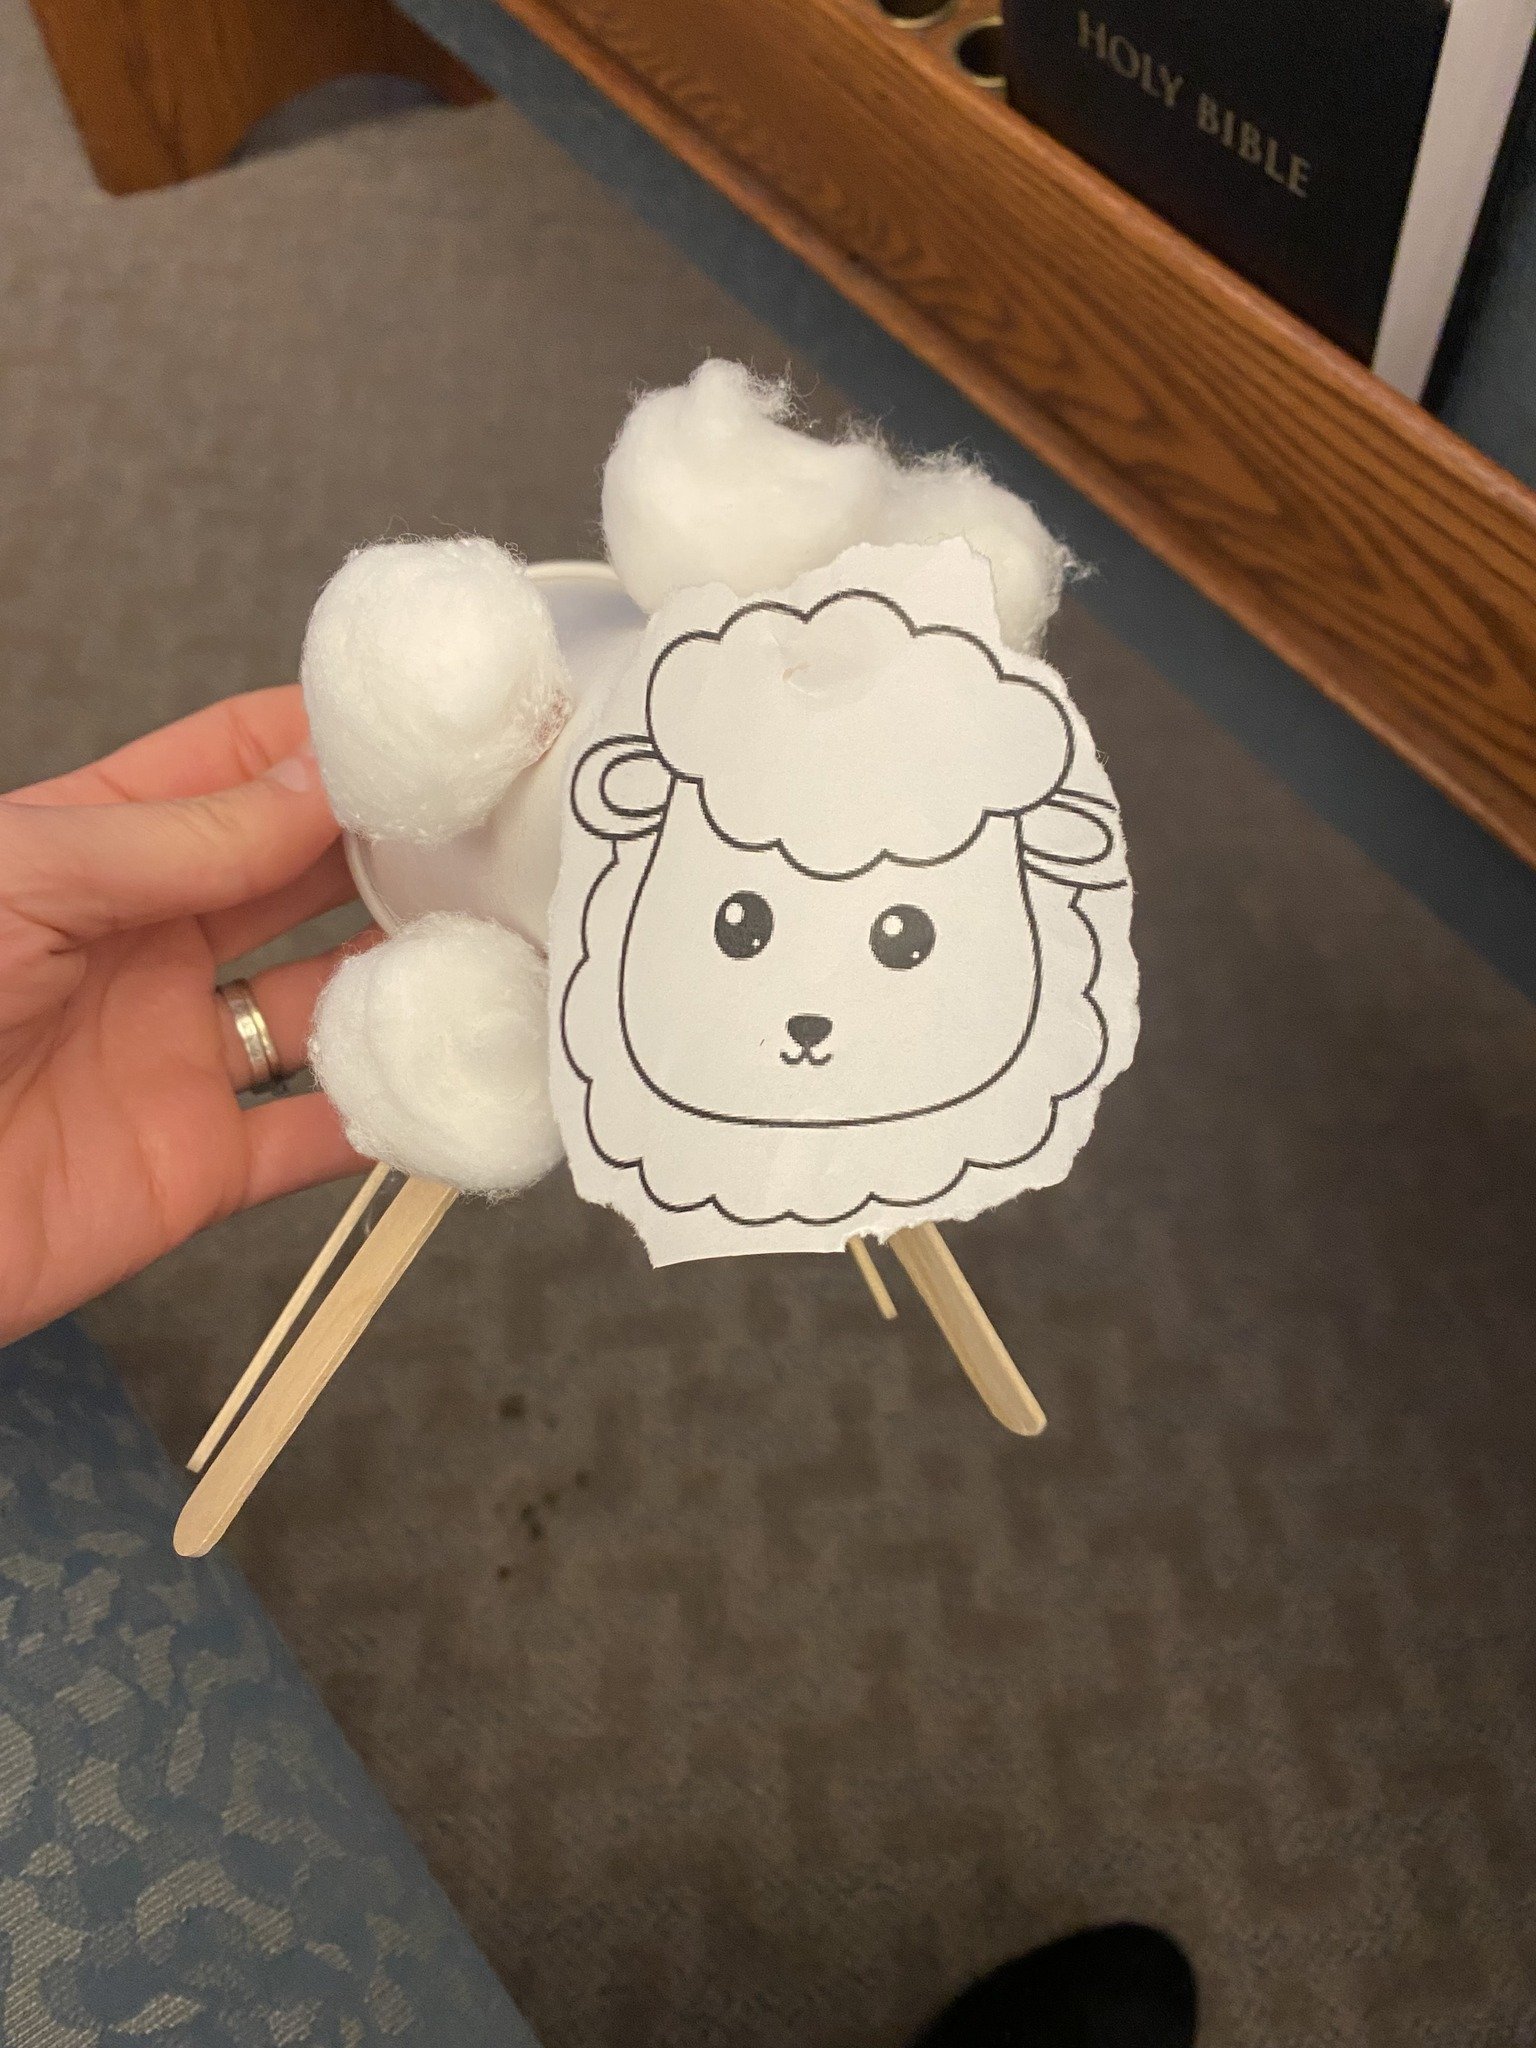 We had some GREAT submissions from the adults for our Sheep Craft from the previous Sunday, so thanks to all who participated!  Based solely on crafts expert votes from the children in attendance last night, below are the winners in the 2 categories.